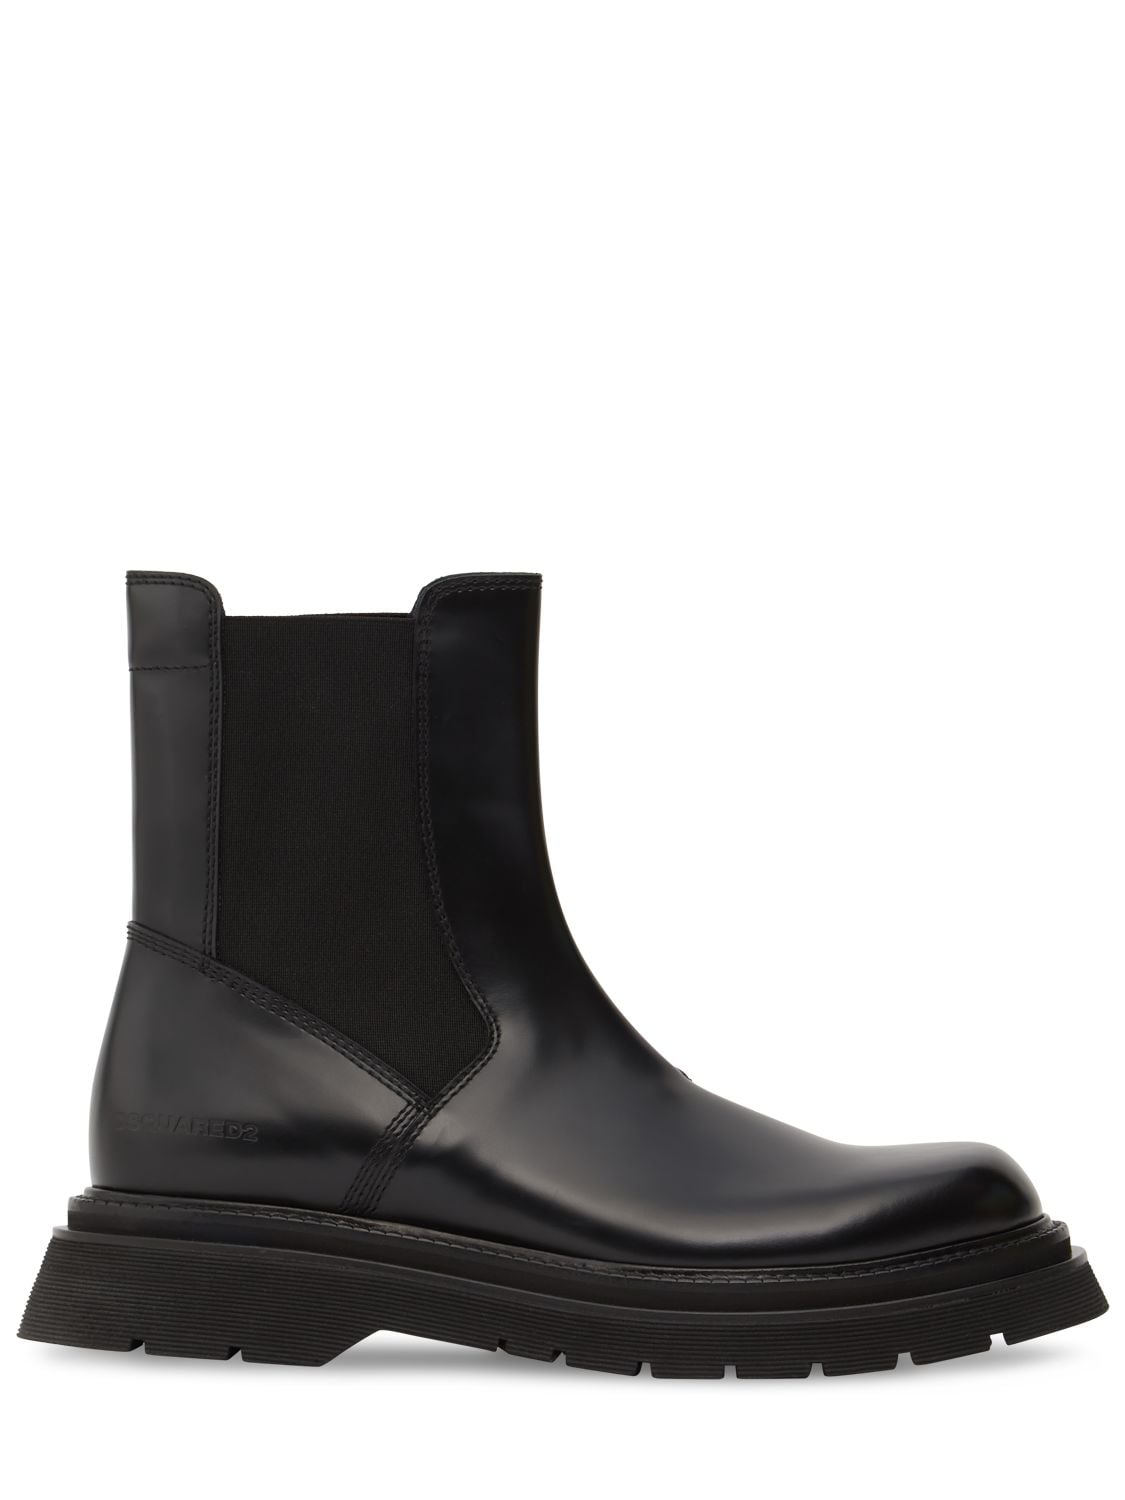 Urban Leather Ankle Boots